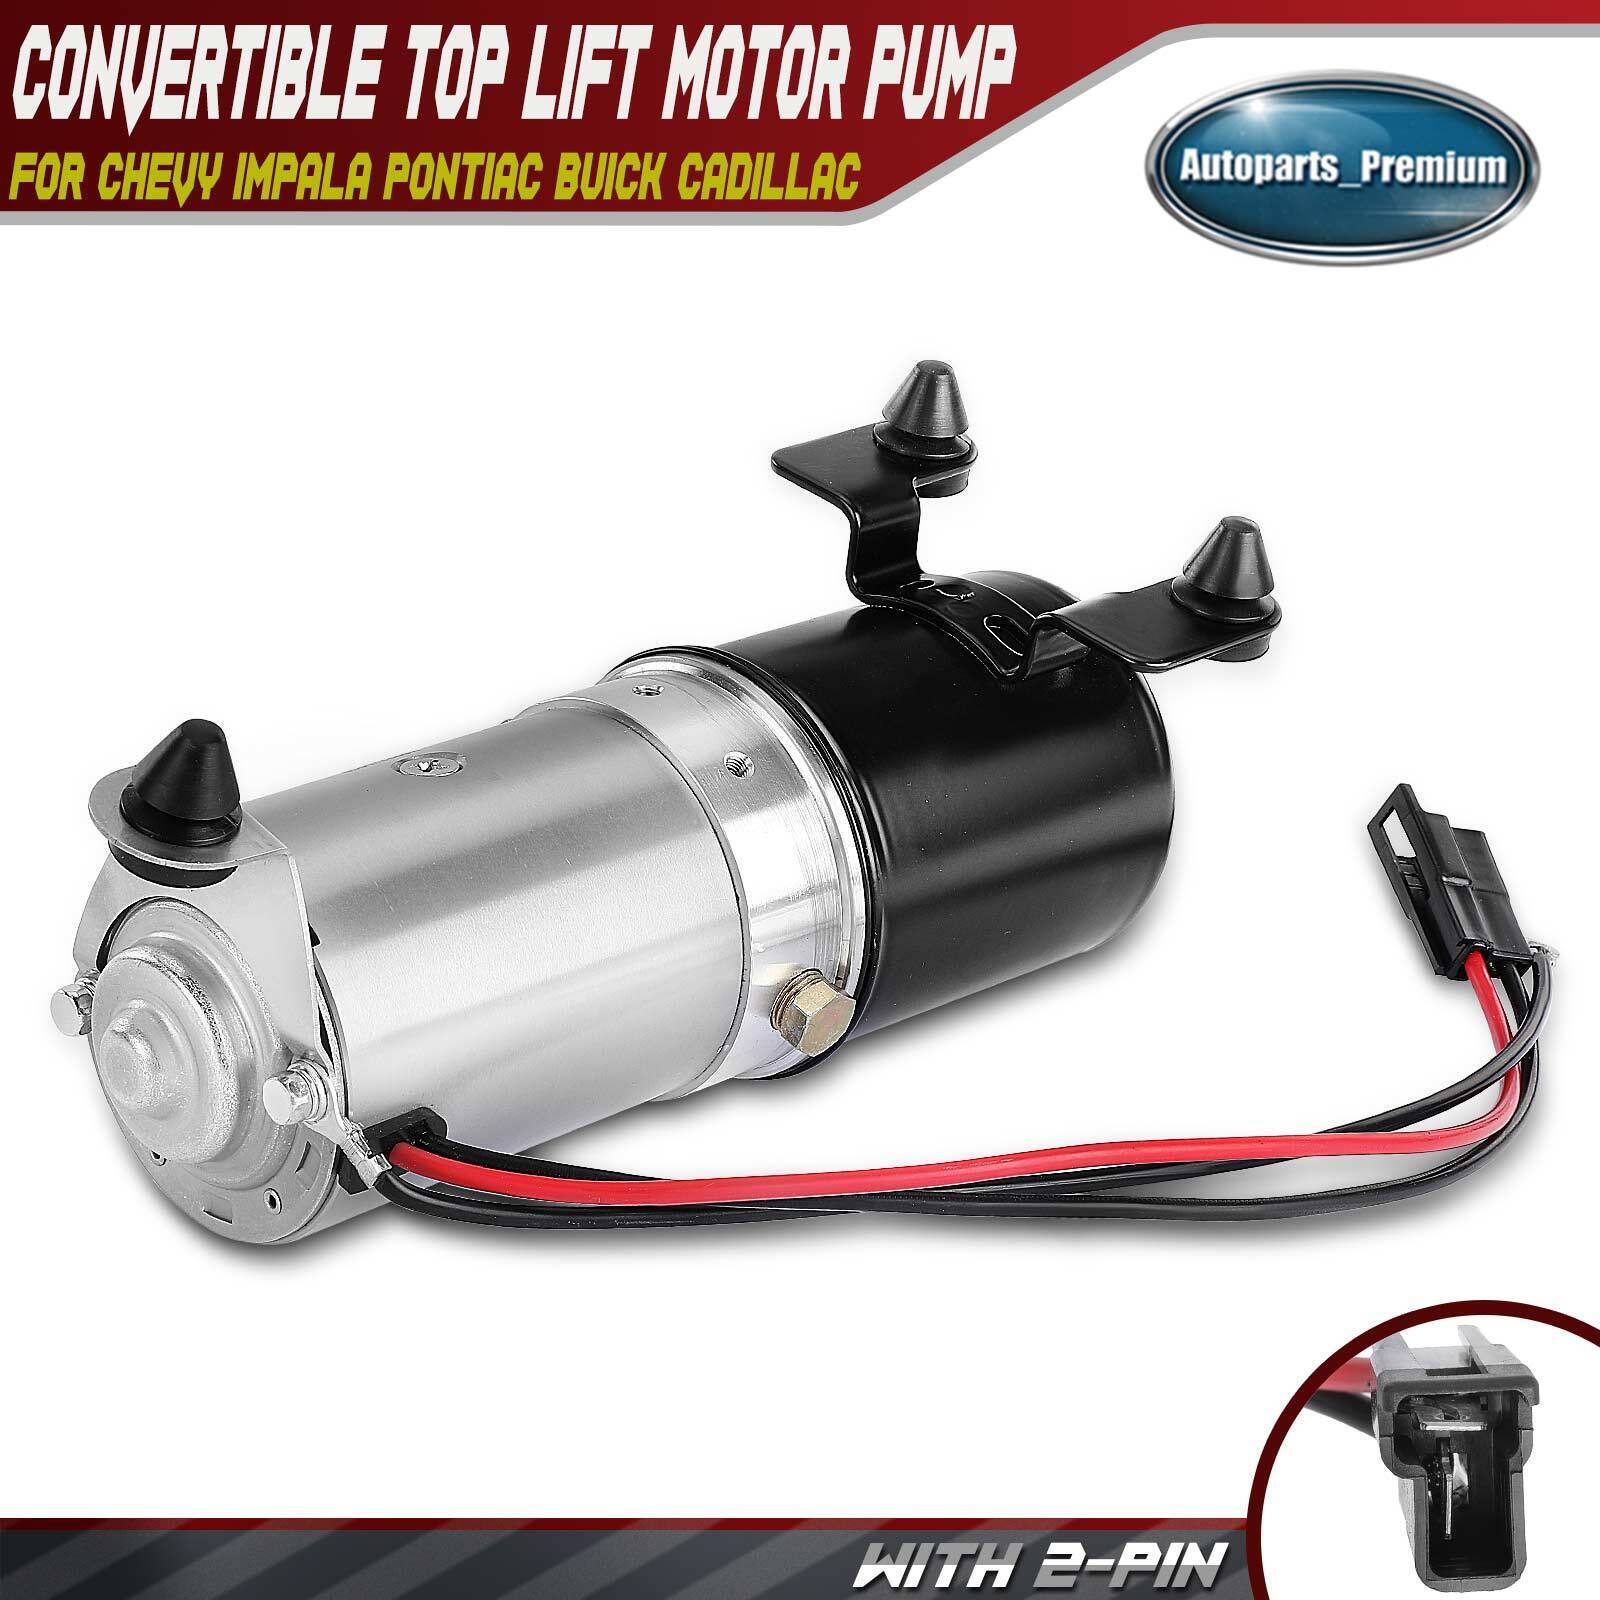 Convertible Top Lift Motor Pump for Chevrolet Impala Pontiac Buick Cadillac Olds